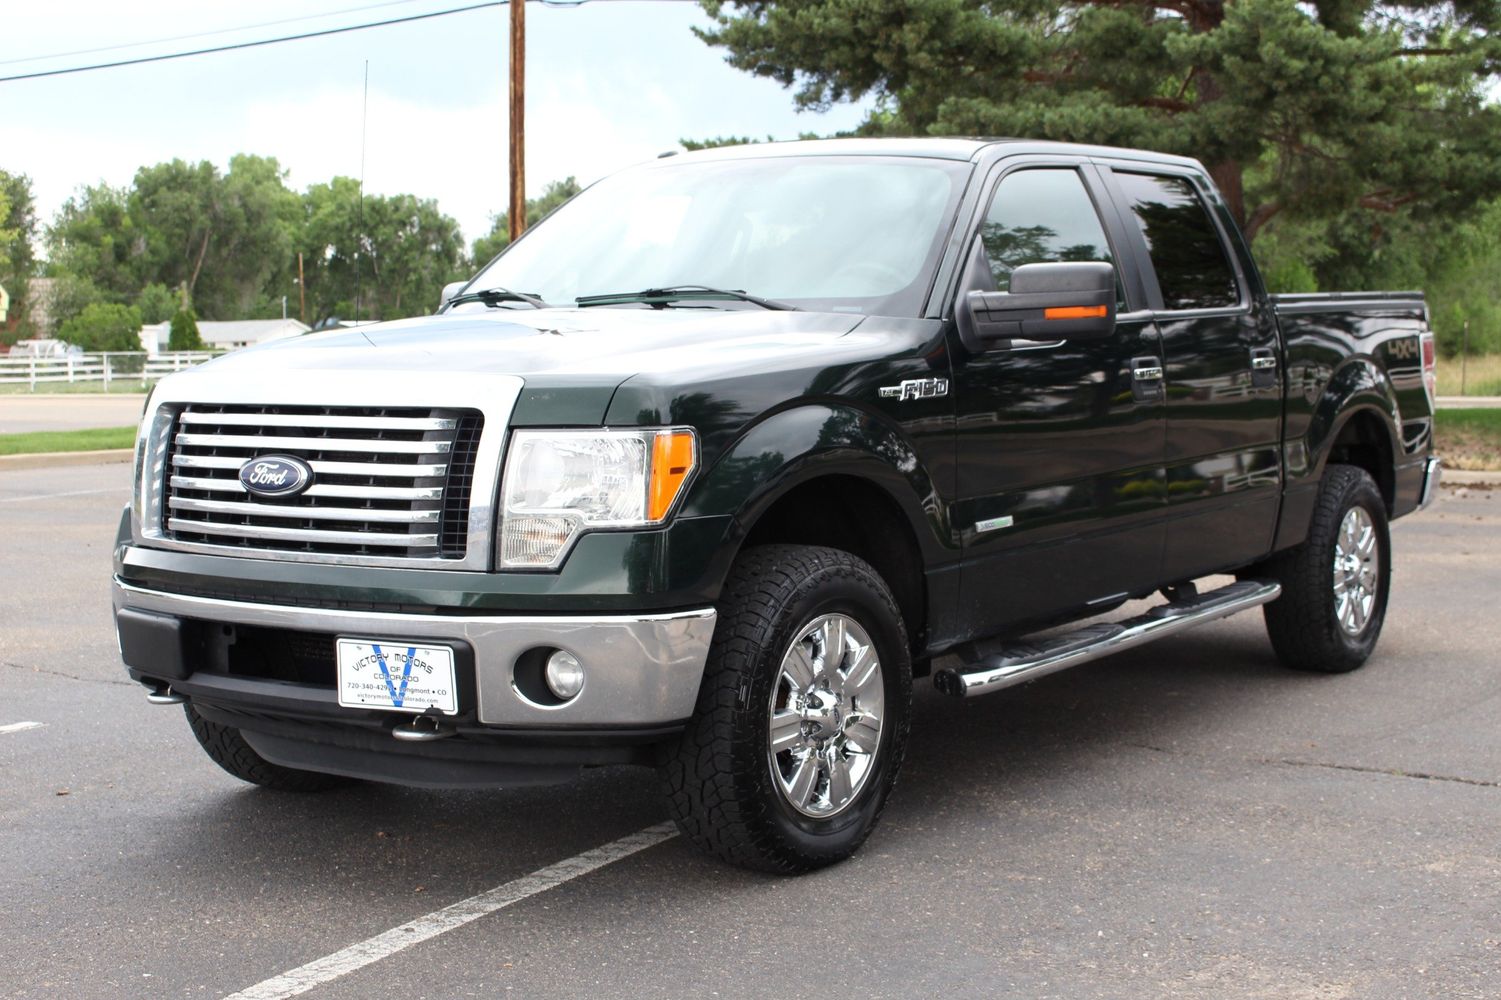 2012 Ford F-150 XLT | Victory Motors of Colorado 2012 Ford F 150 3.7 V6 Towing Capacity